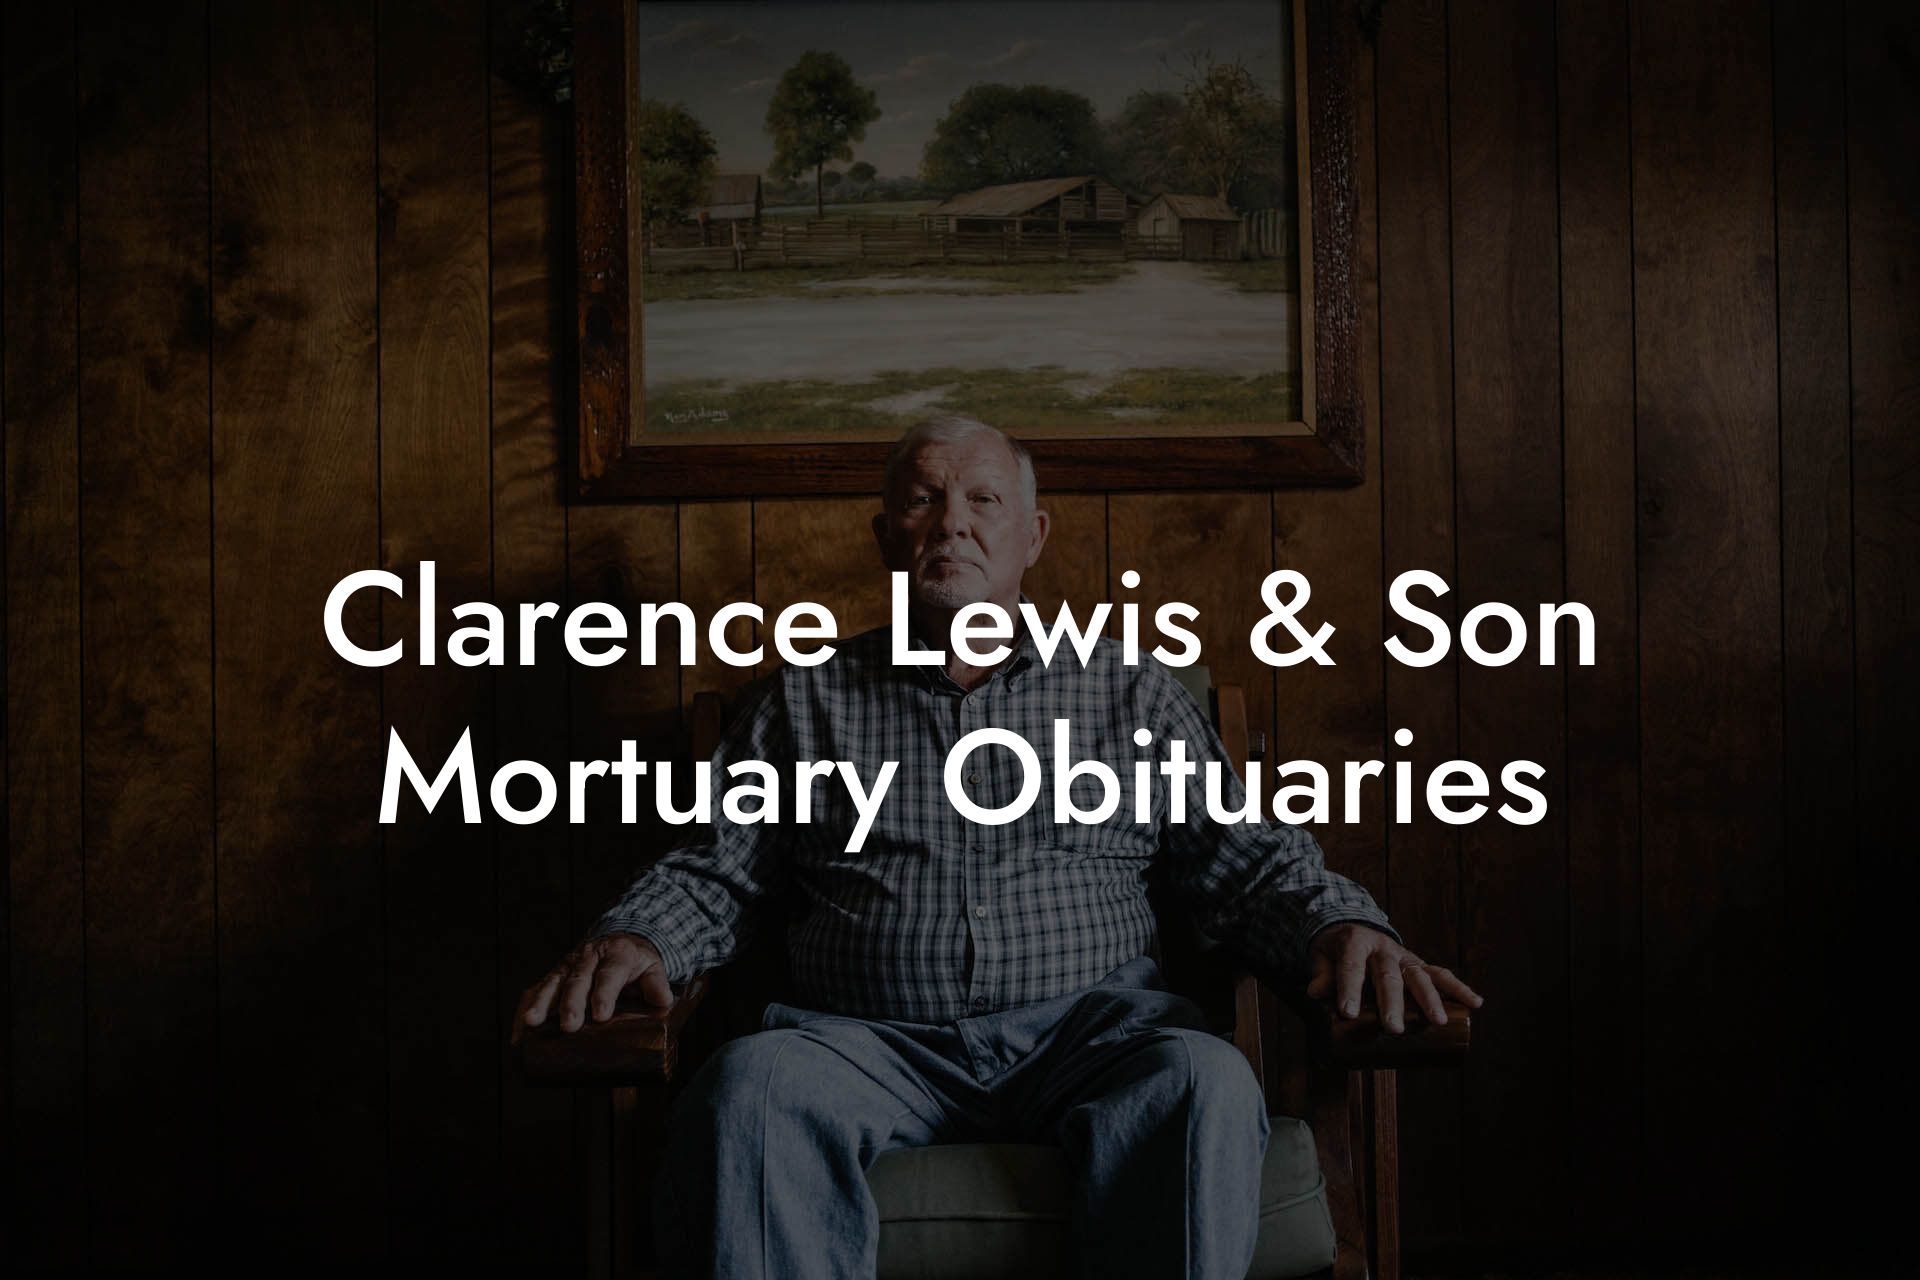 Clarence Lewis & Son Mortuary Obituaries